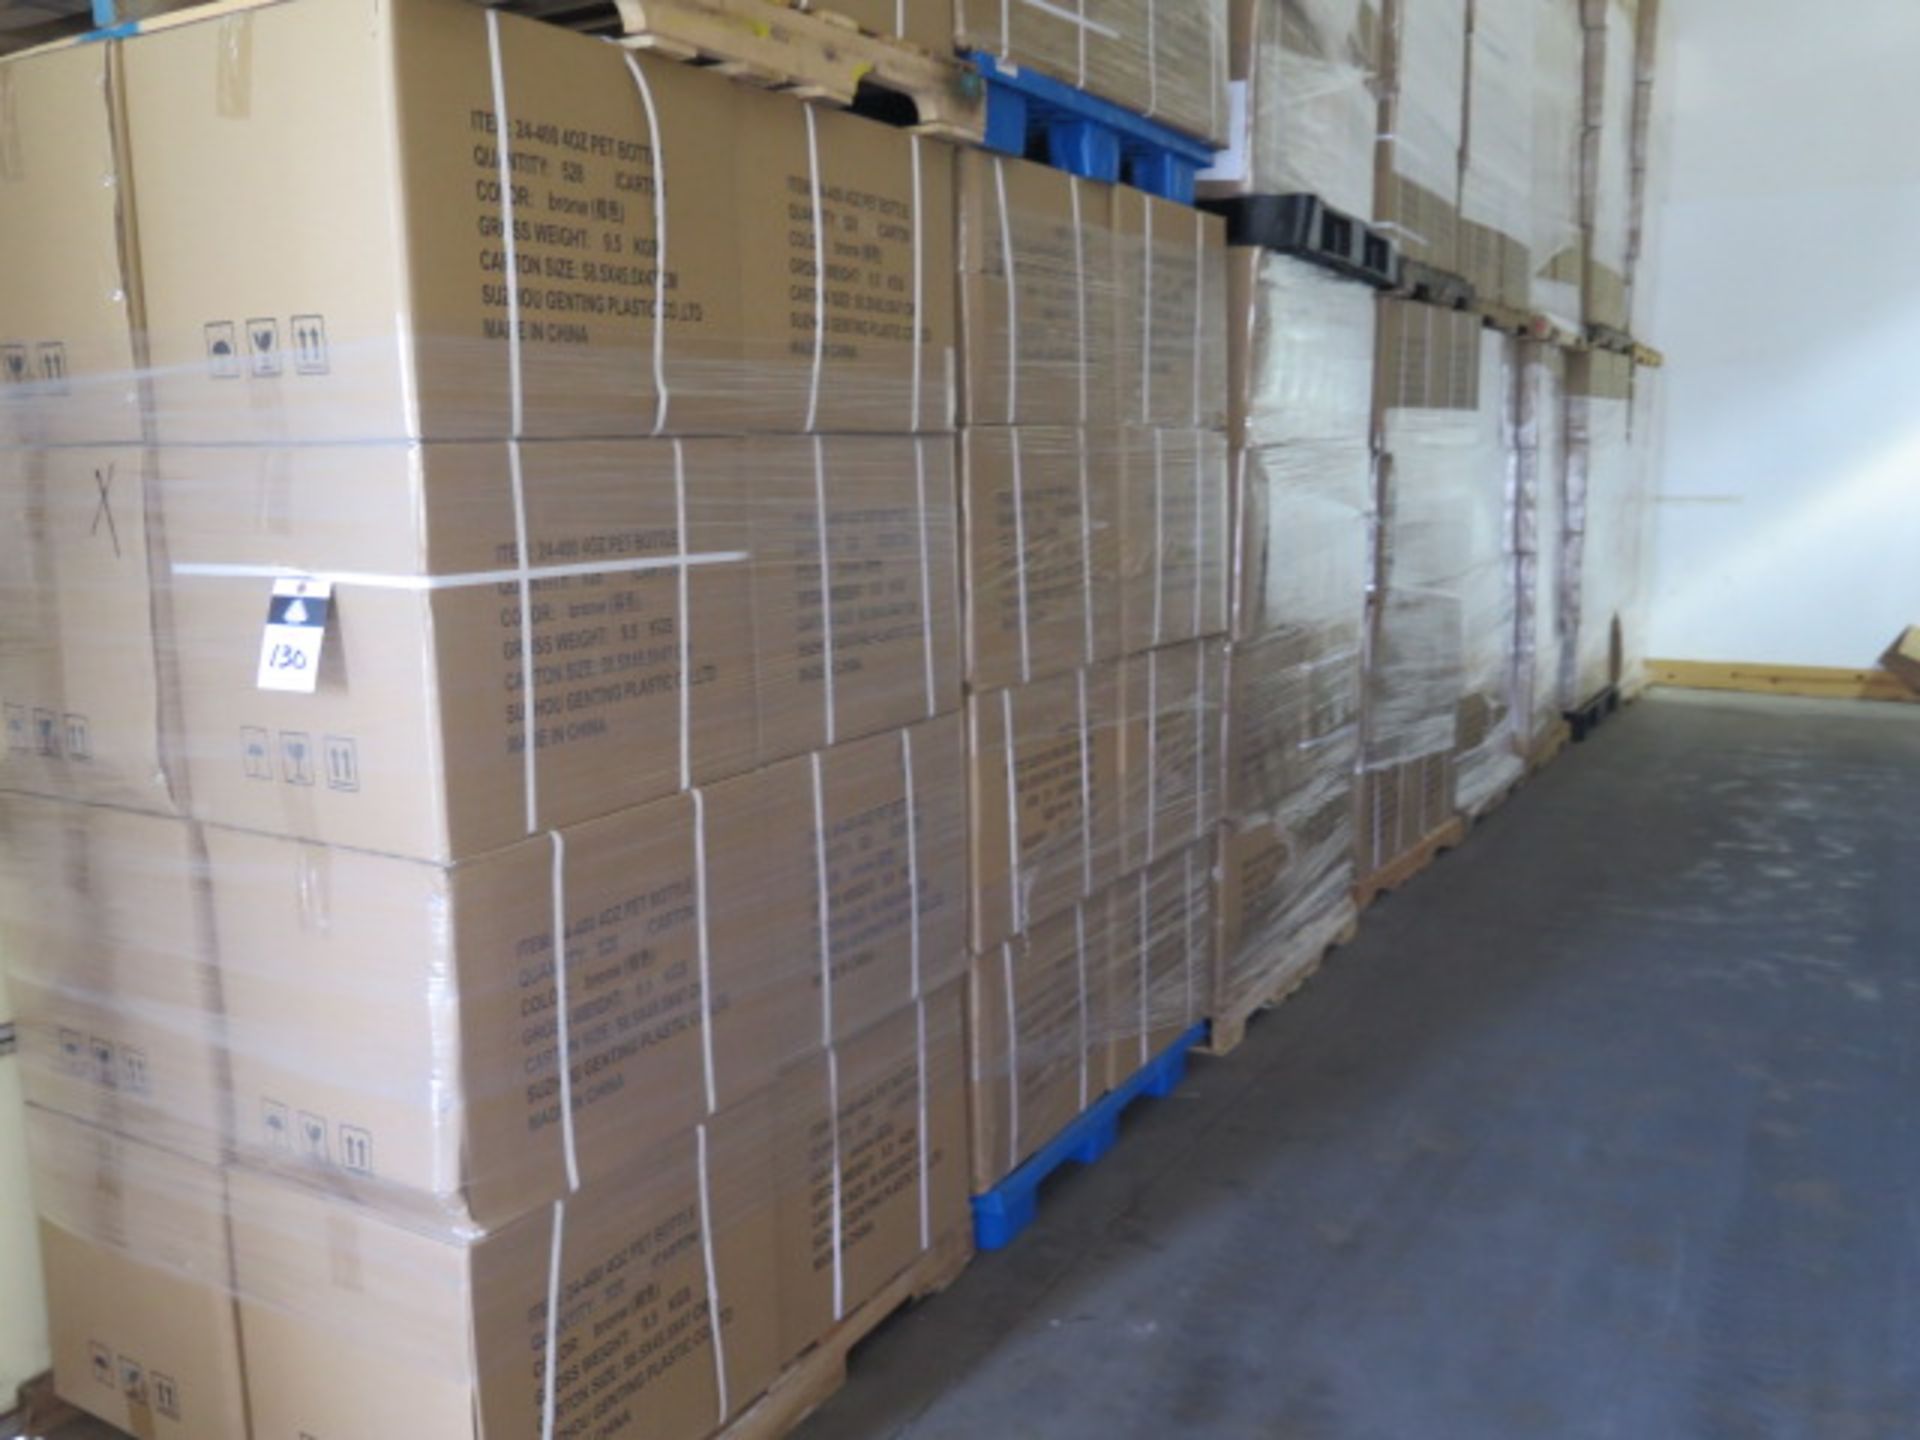 4 oz Brown 24-400 Plastic Bottles (16-Pallets) (Approx 135,000 Bottles) (SOLD AS-IS - NO WARRANTY) - Image 3 of 6